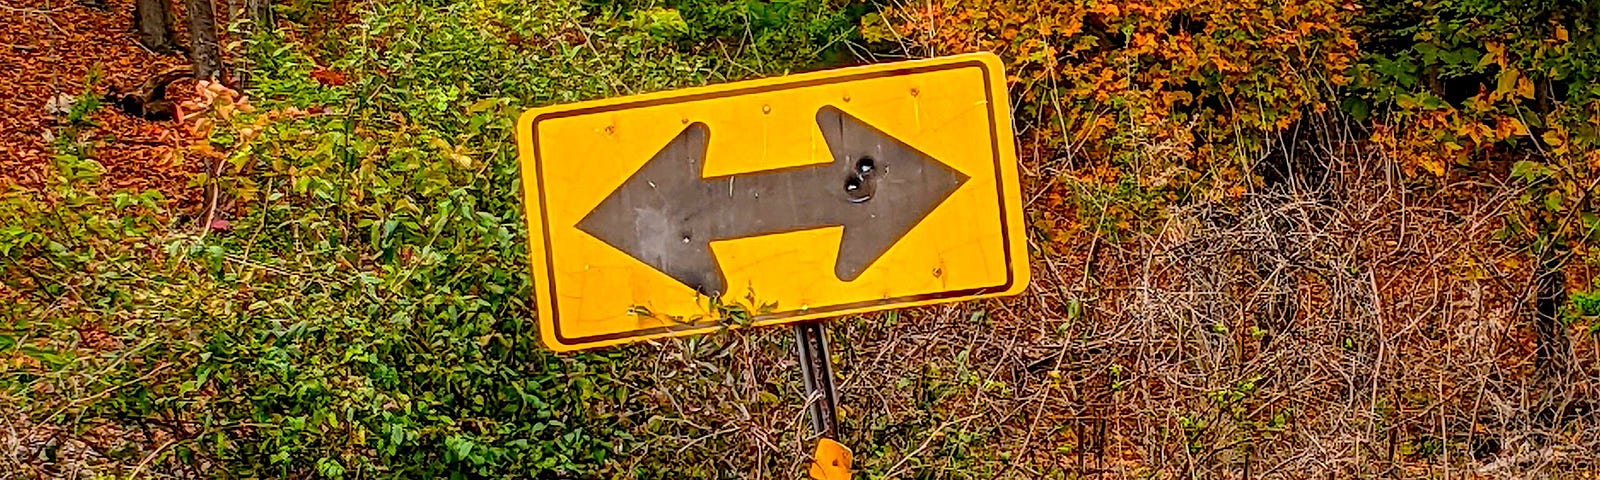 Road sign with an arrow pointing in opposite directions